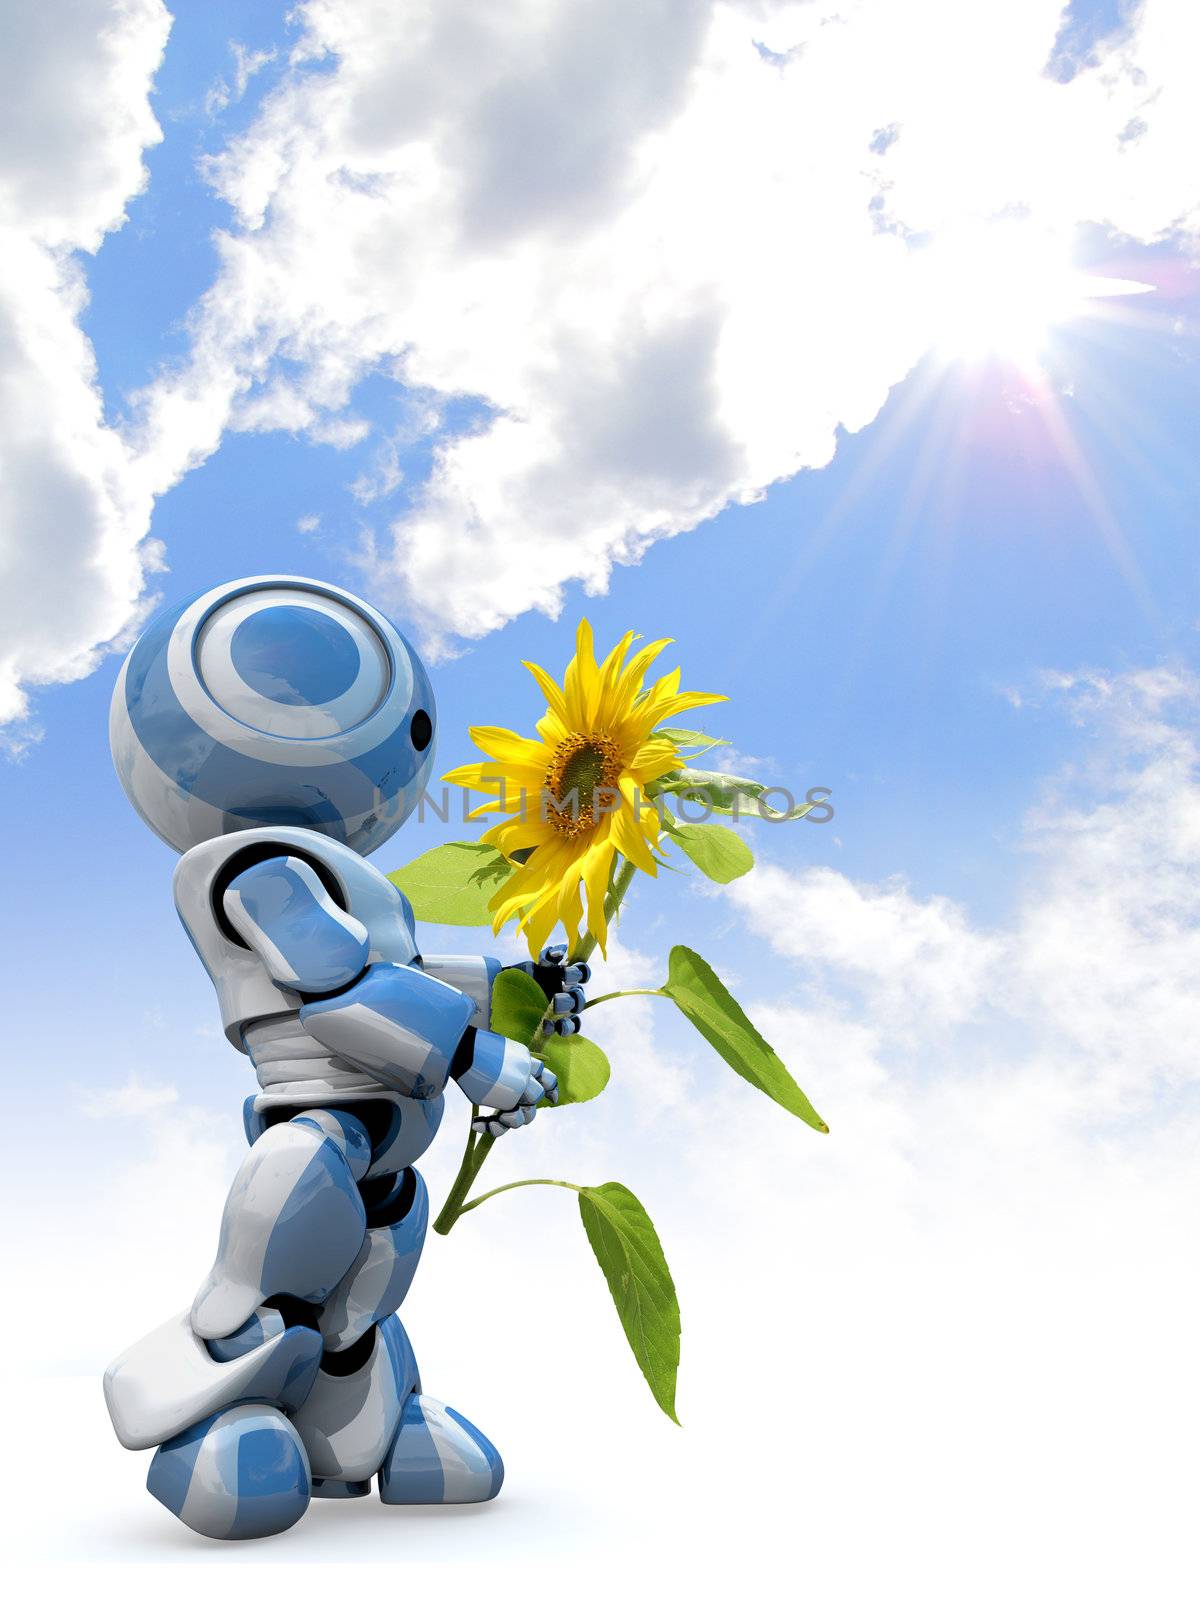 A glossy reflective 3d robot looking in awe at a large sunflower while standing in front of a cloudy sky.